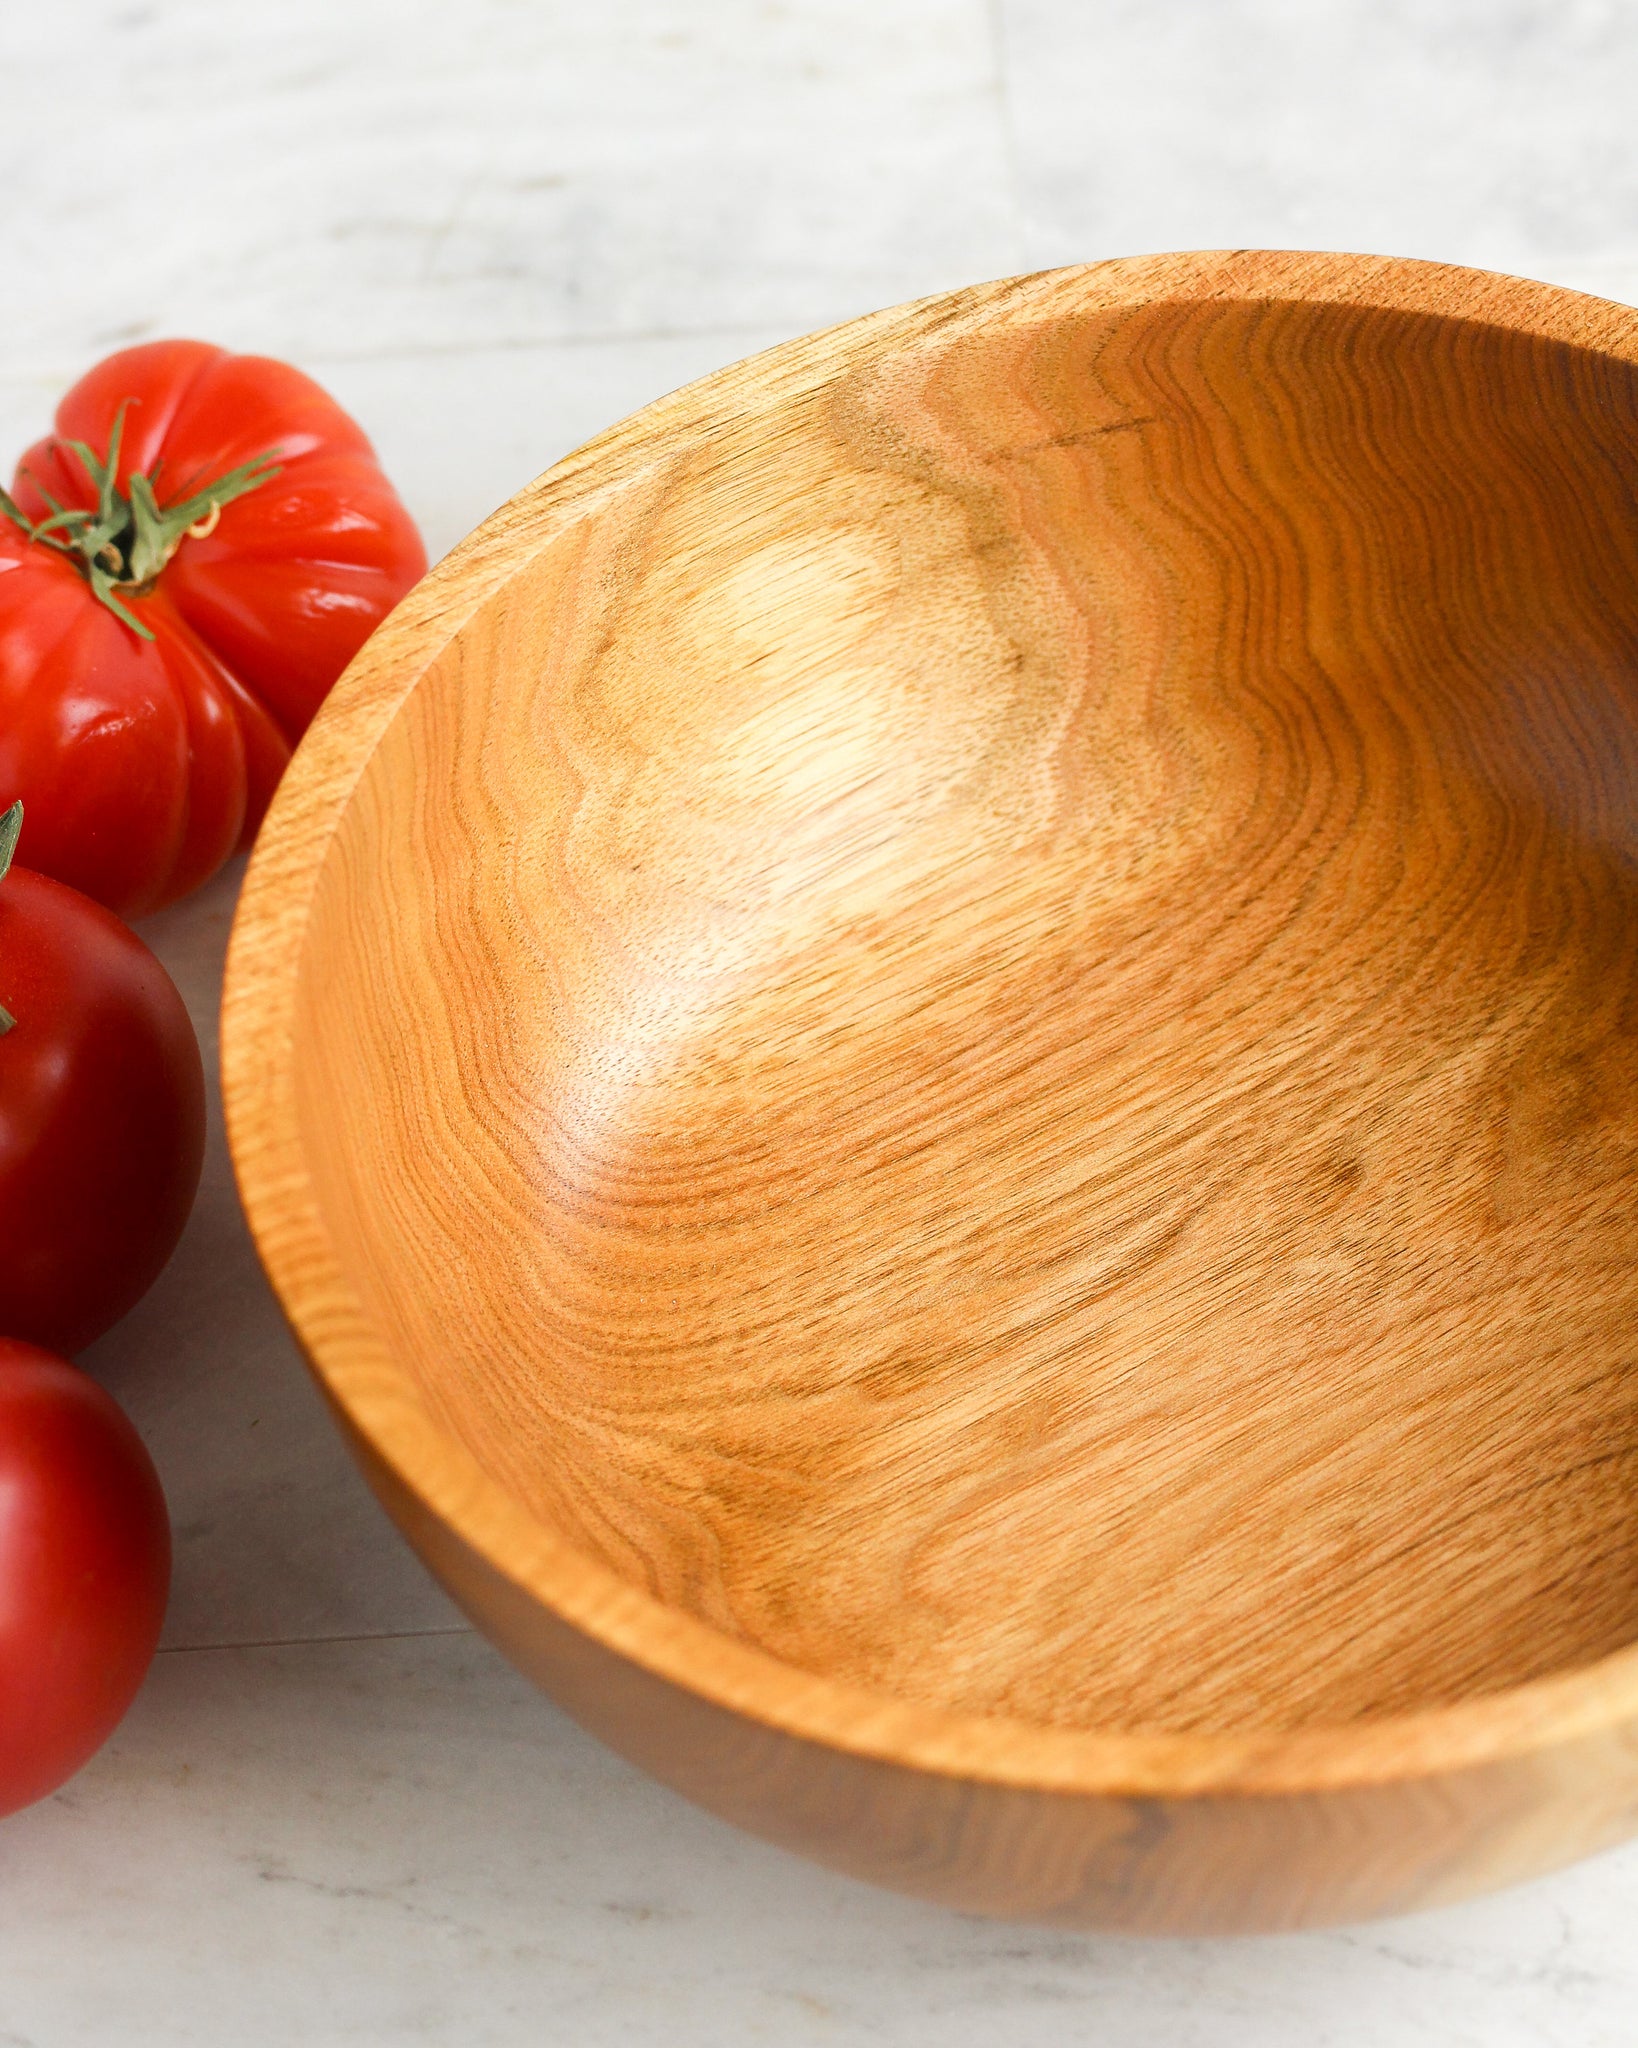 Butternut Wood Bowl, Small Dough Proofing Bowl